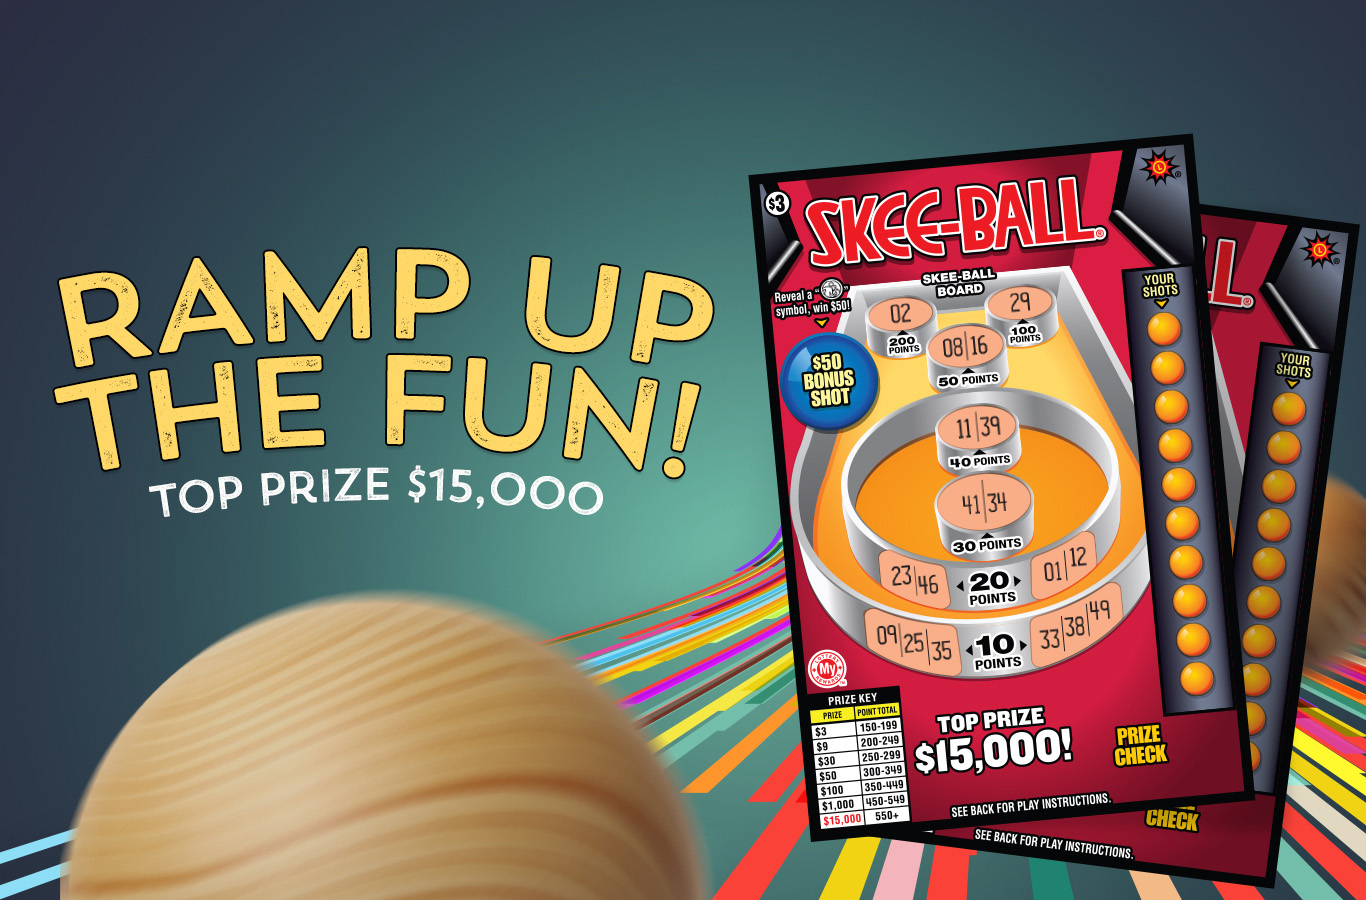 Ramp up the fun and play the new SKEE-BALL® Scratch-Off for a chance to win up to $15,000!